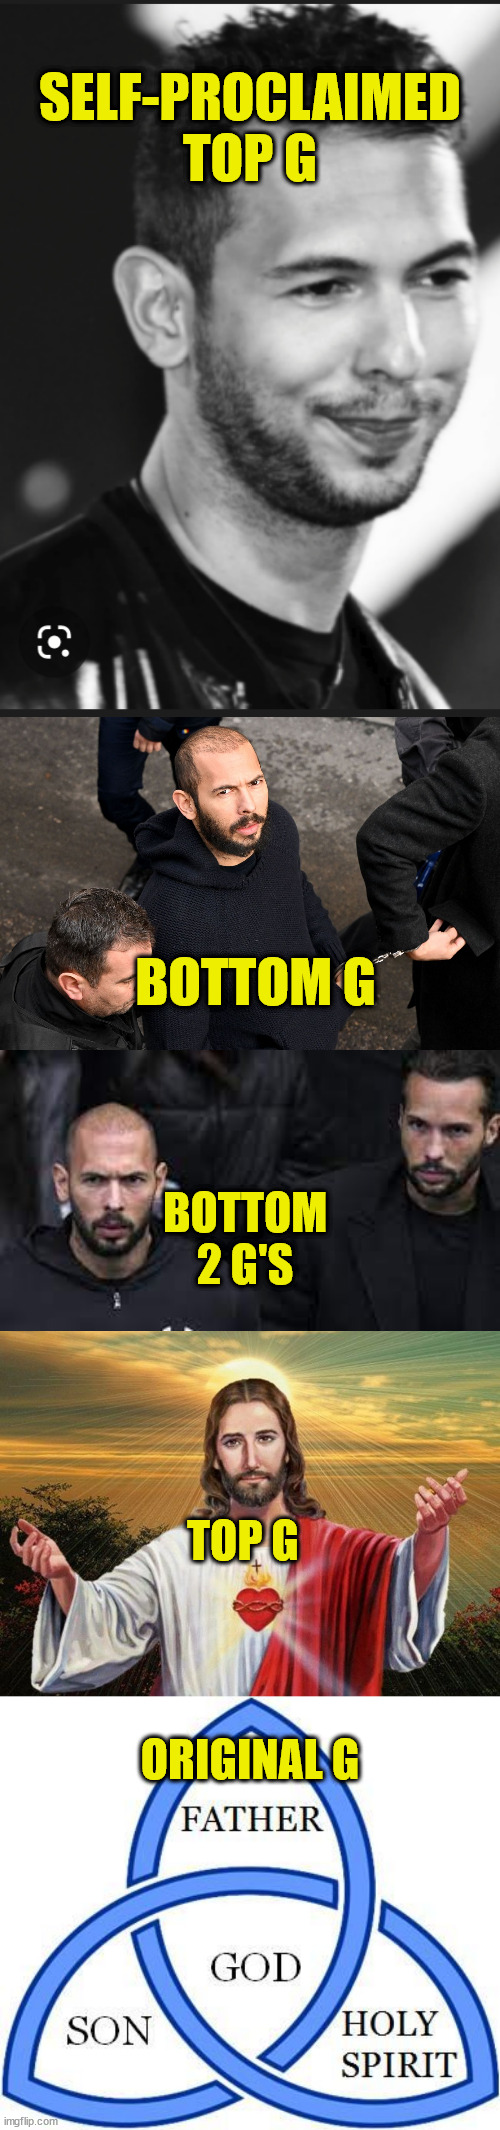 andrew tainted | SELF-PROCLAIMED TOP G; BOTTOM G; BOTTOM 2 G'S; TOP G; ORIGINAL G | image tagged in top g,g,andrew tate,self-snitch | made w/ Imgflip meme maker